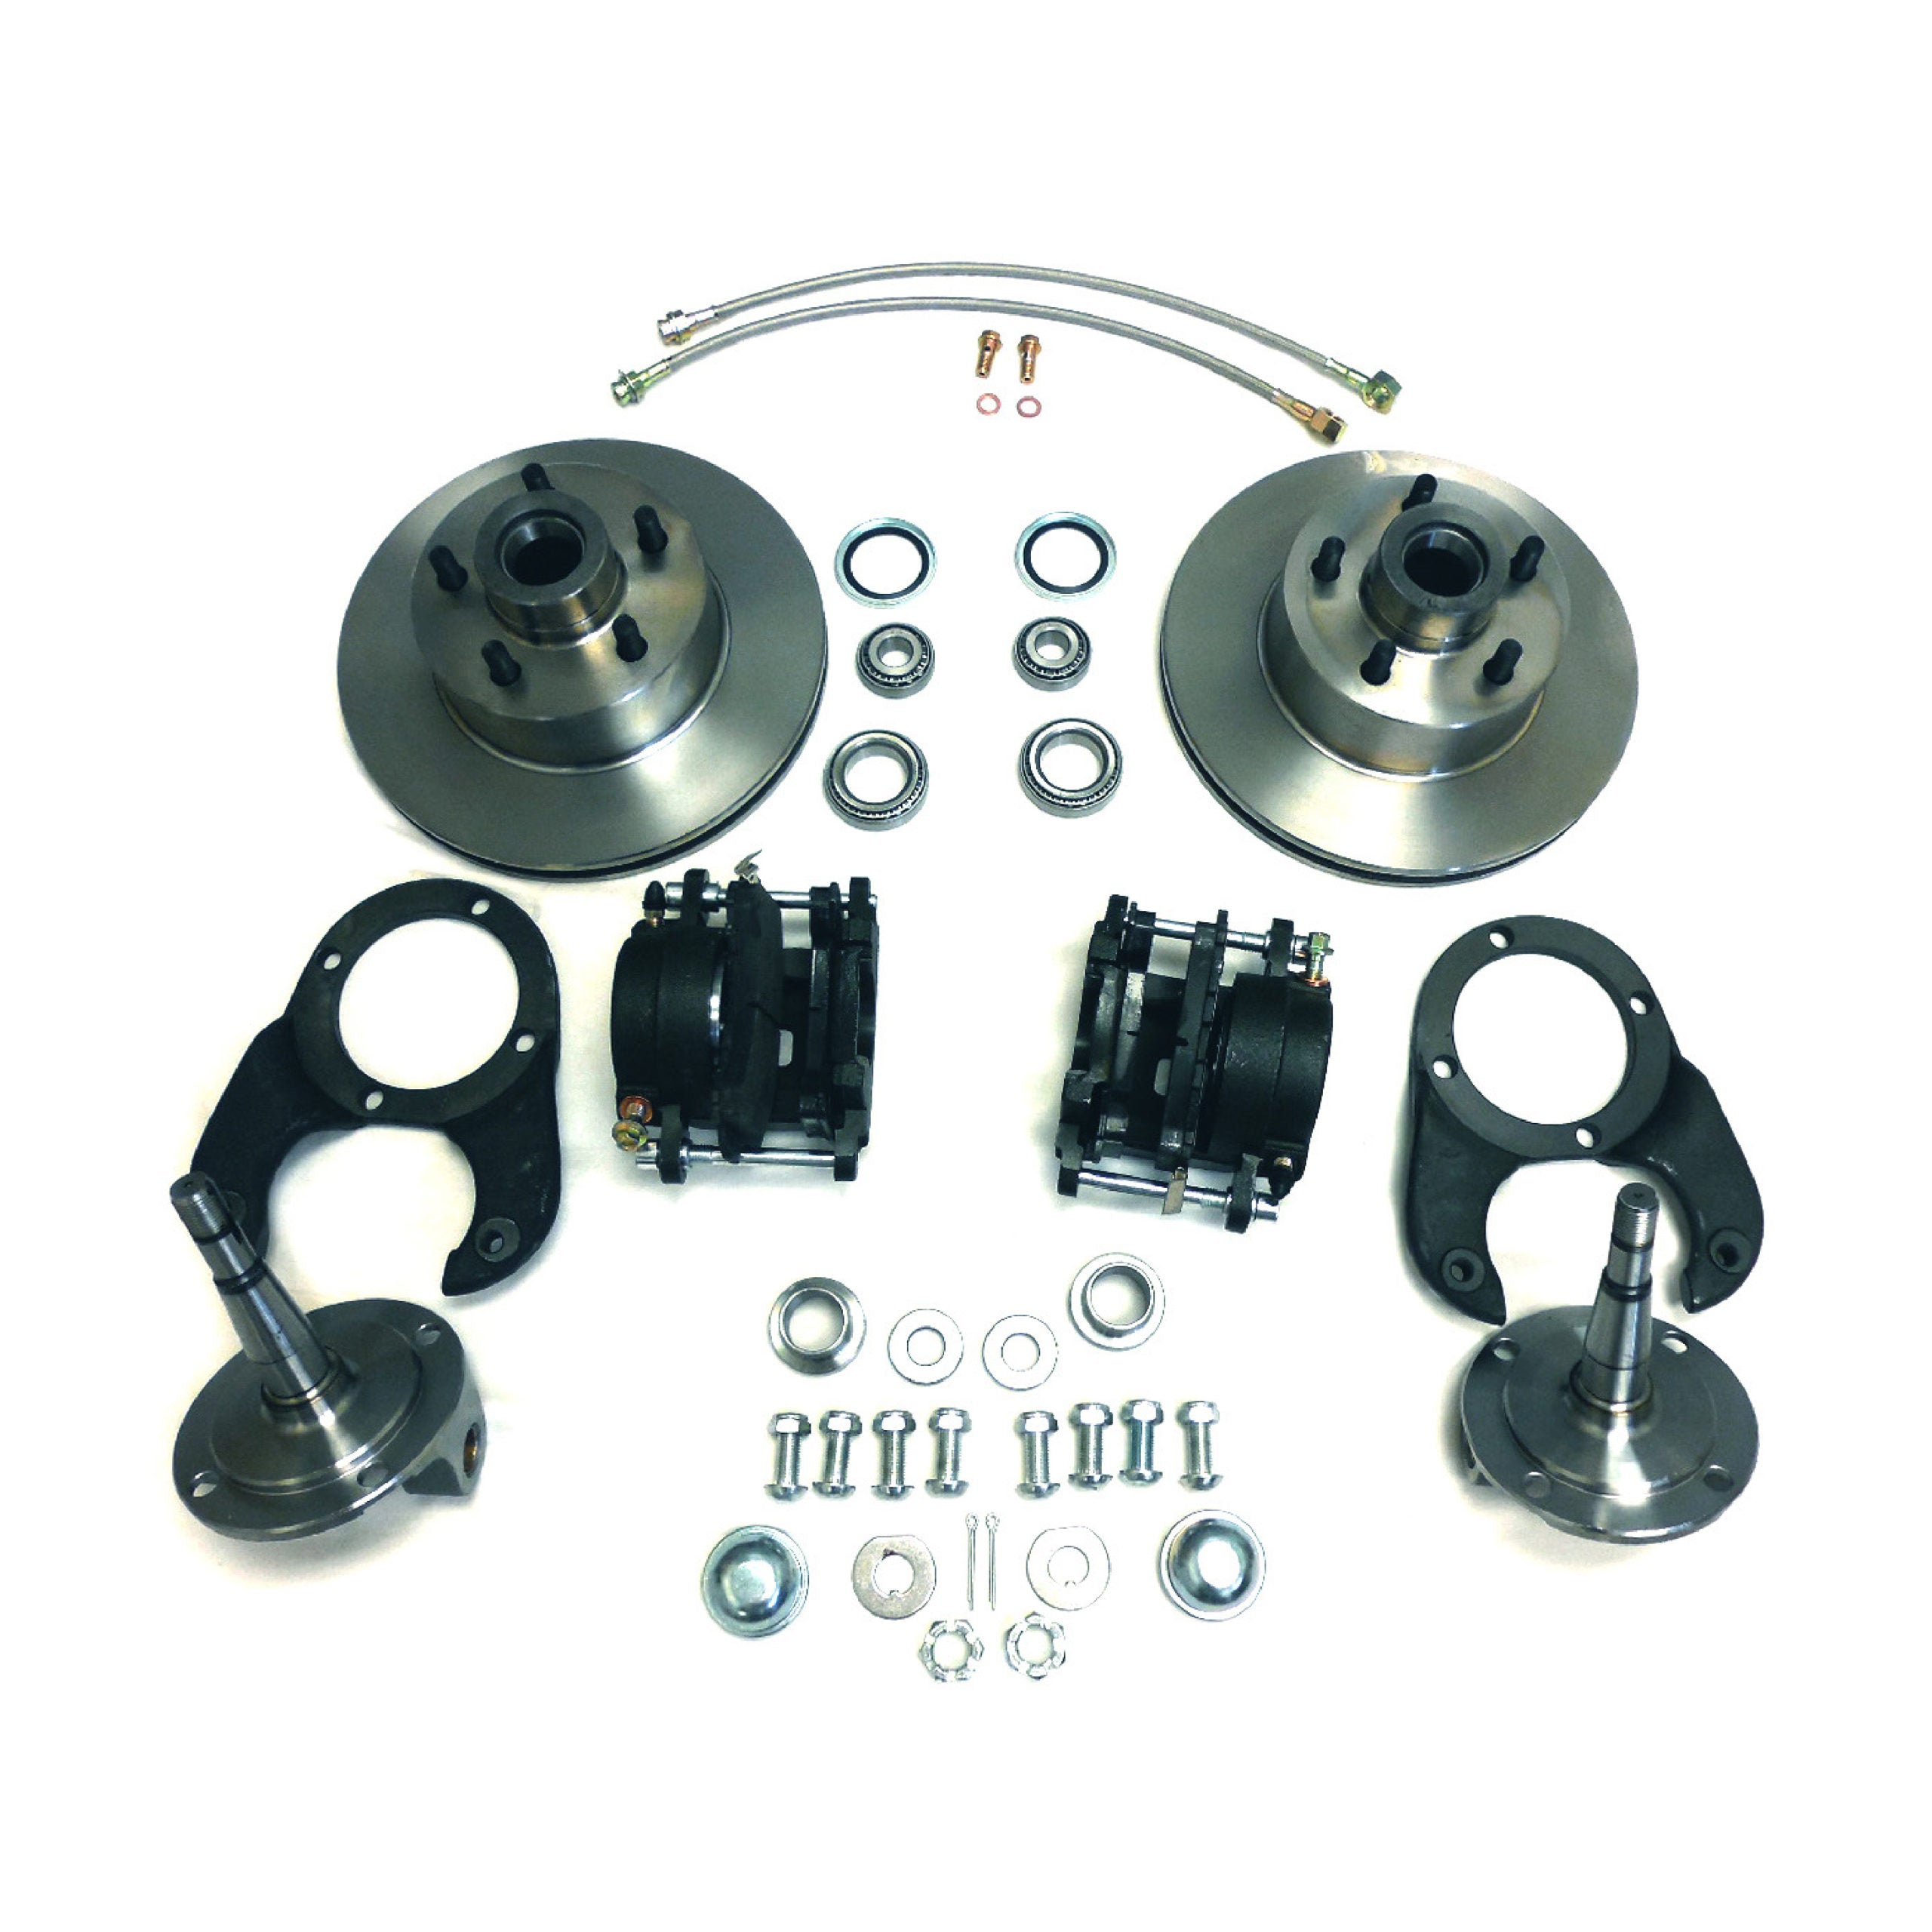 Racing Power Company R1709-1 37-48 early ford front disc brake kit (a)